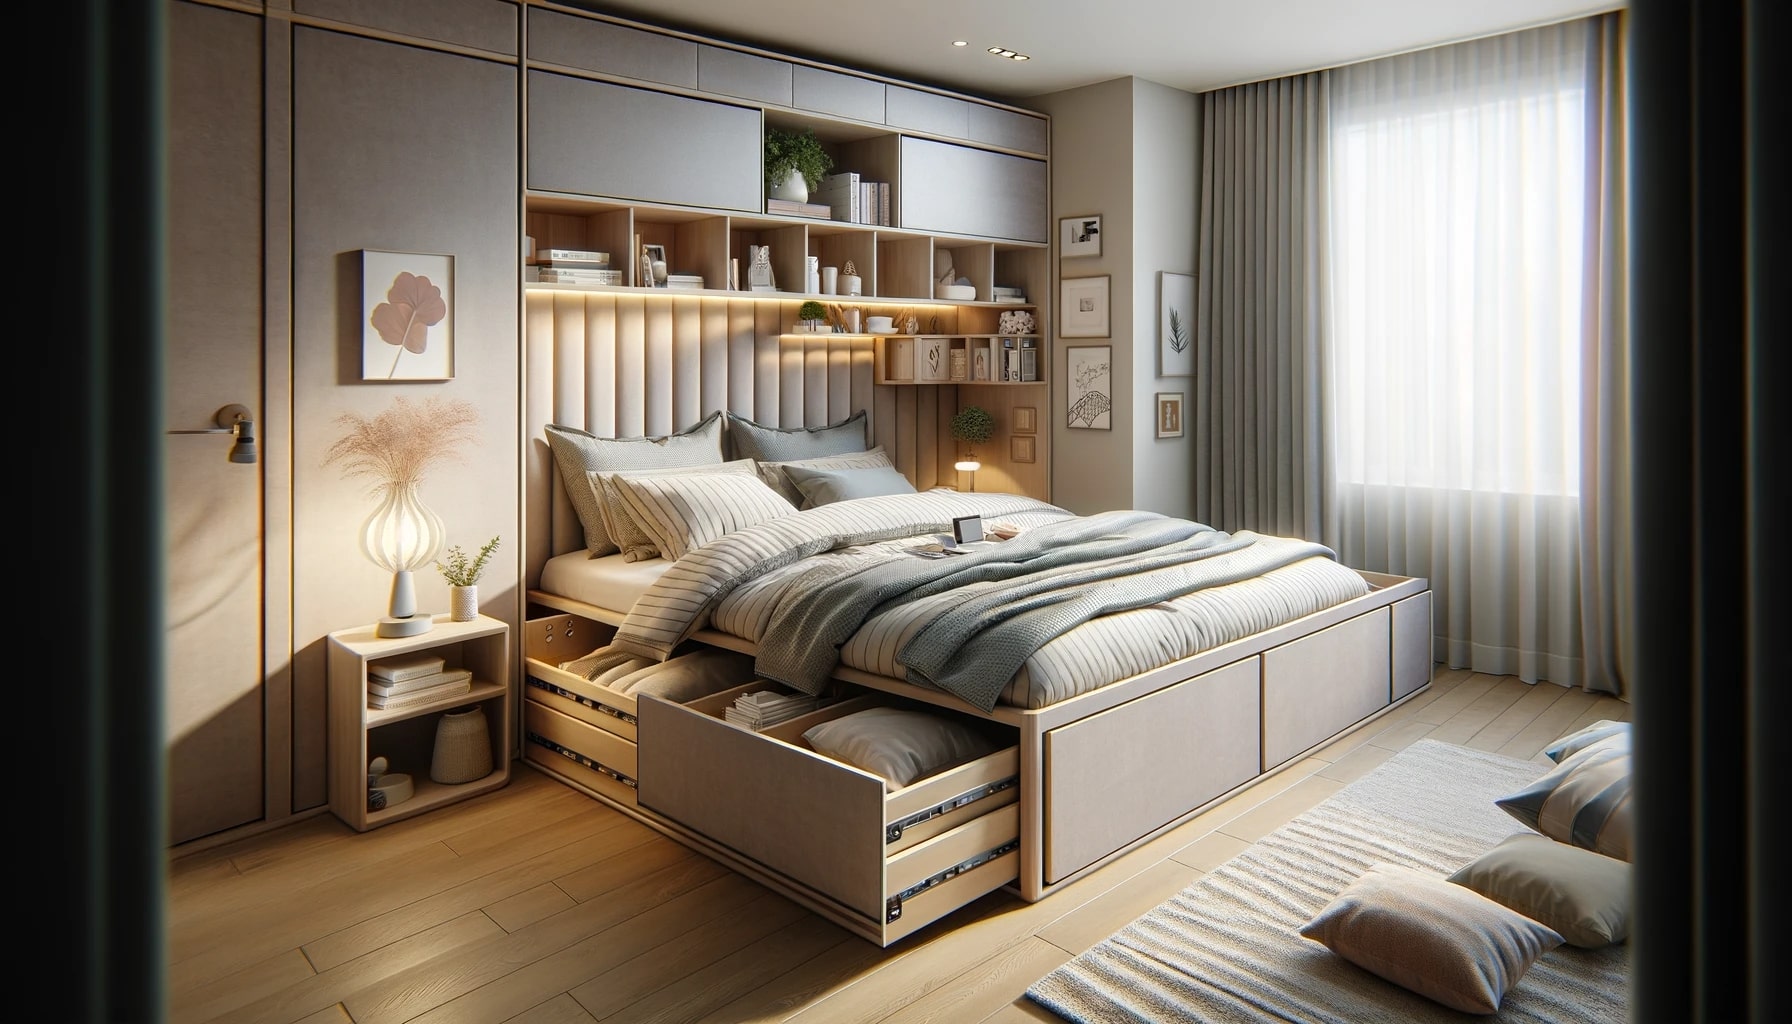 A small bedroom with space-saving furniture, including a bed and a bedside table.